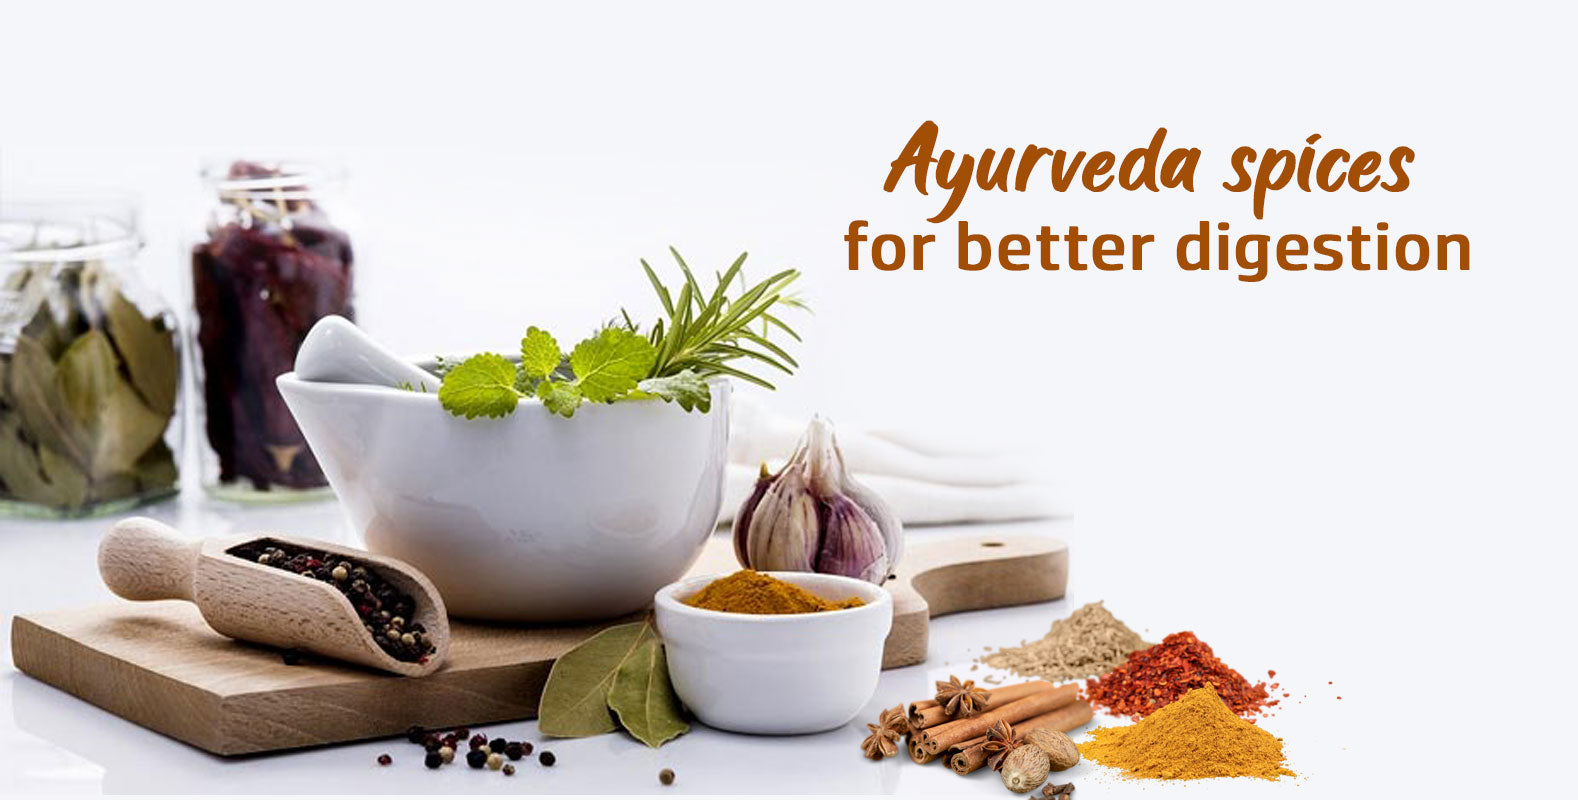 Ayurveda spices for better digestion